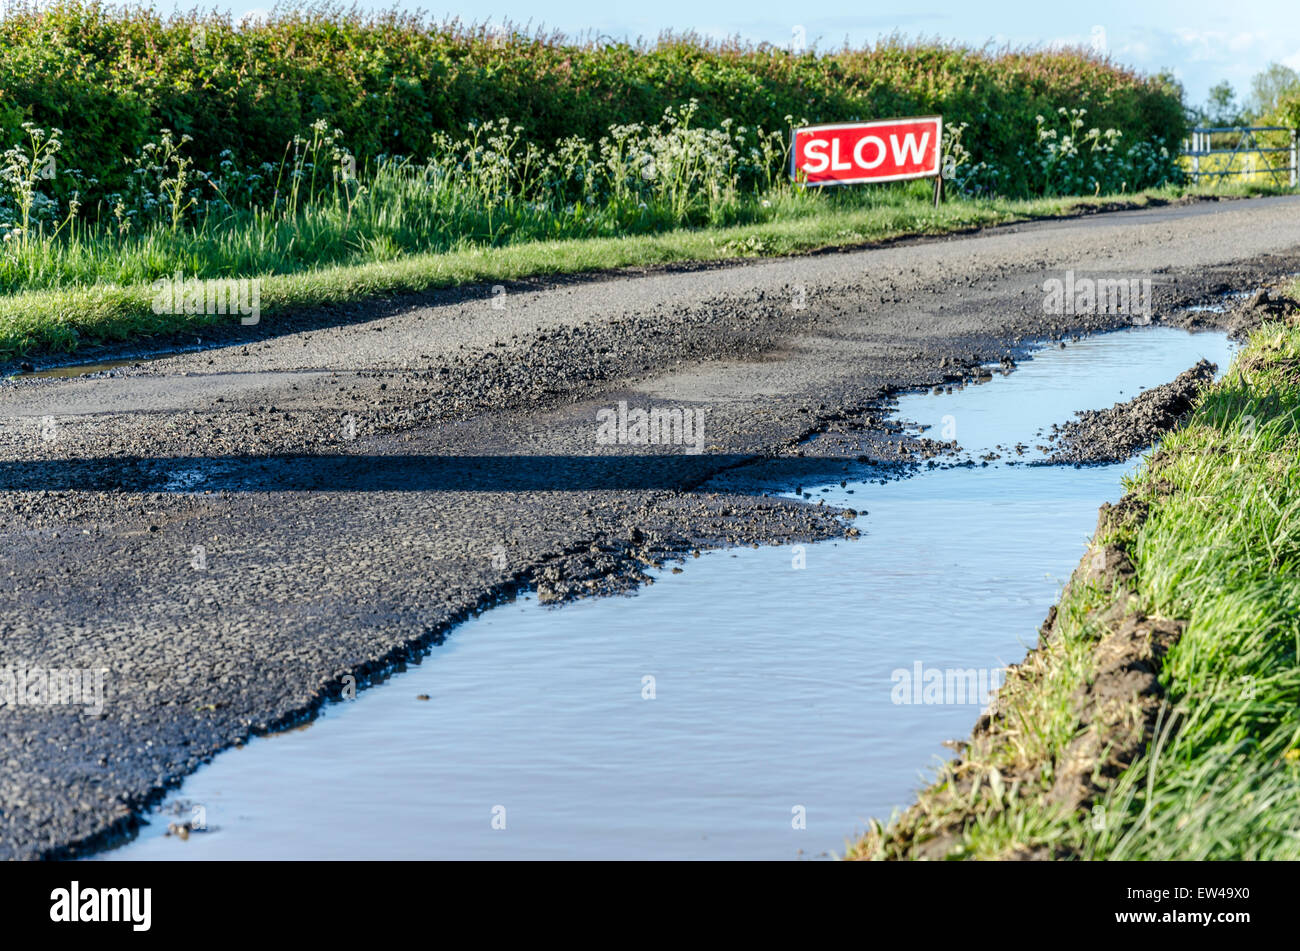 Water filled pot hole on a country road with a 'SLOW' sign in the background Stock Photo